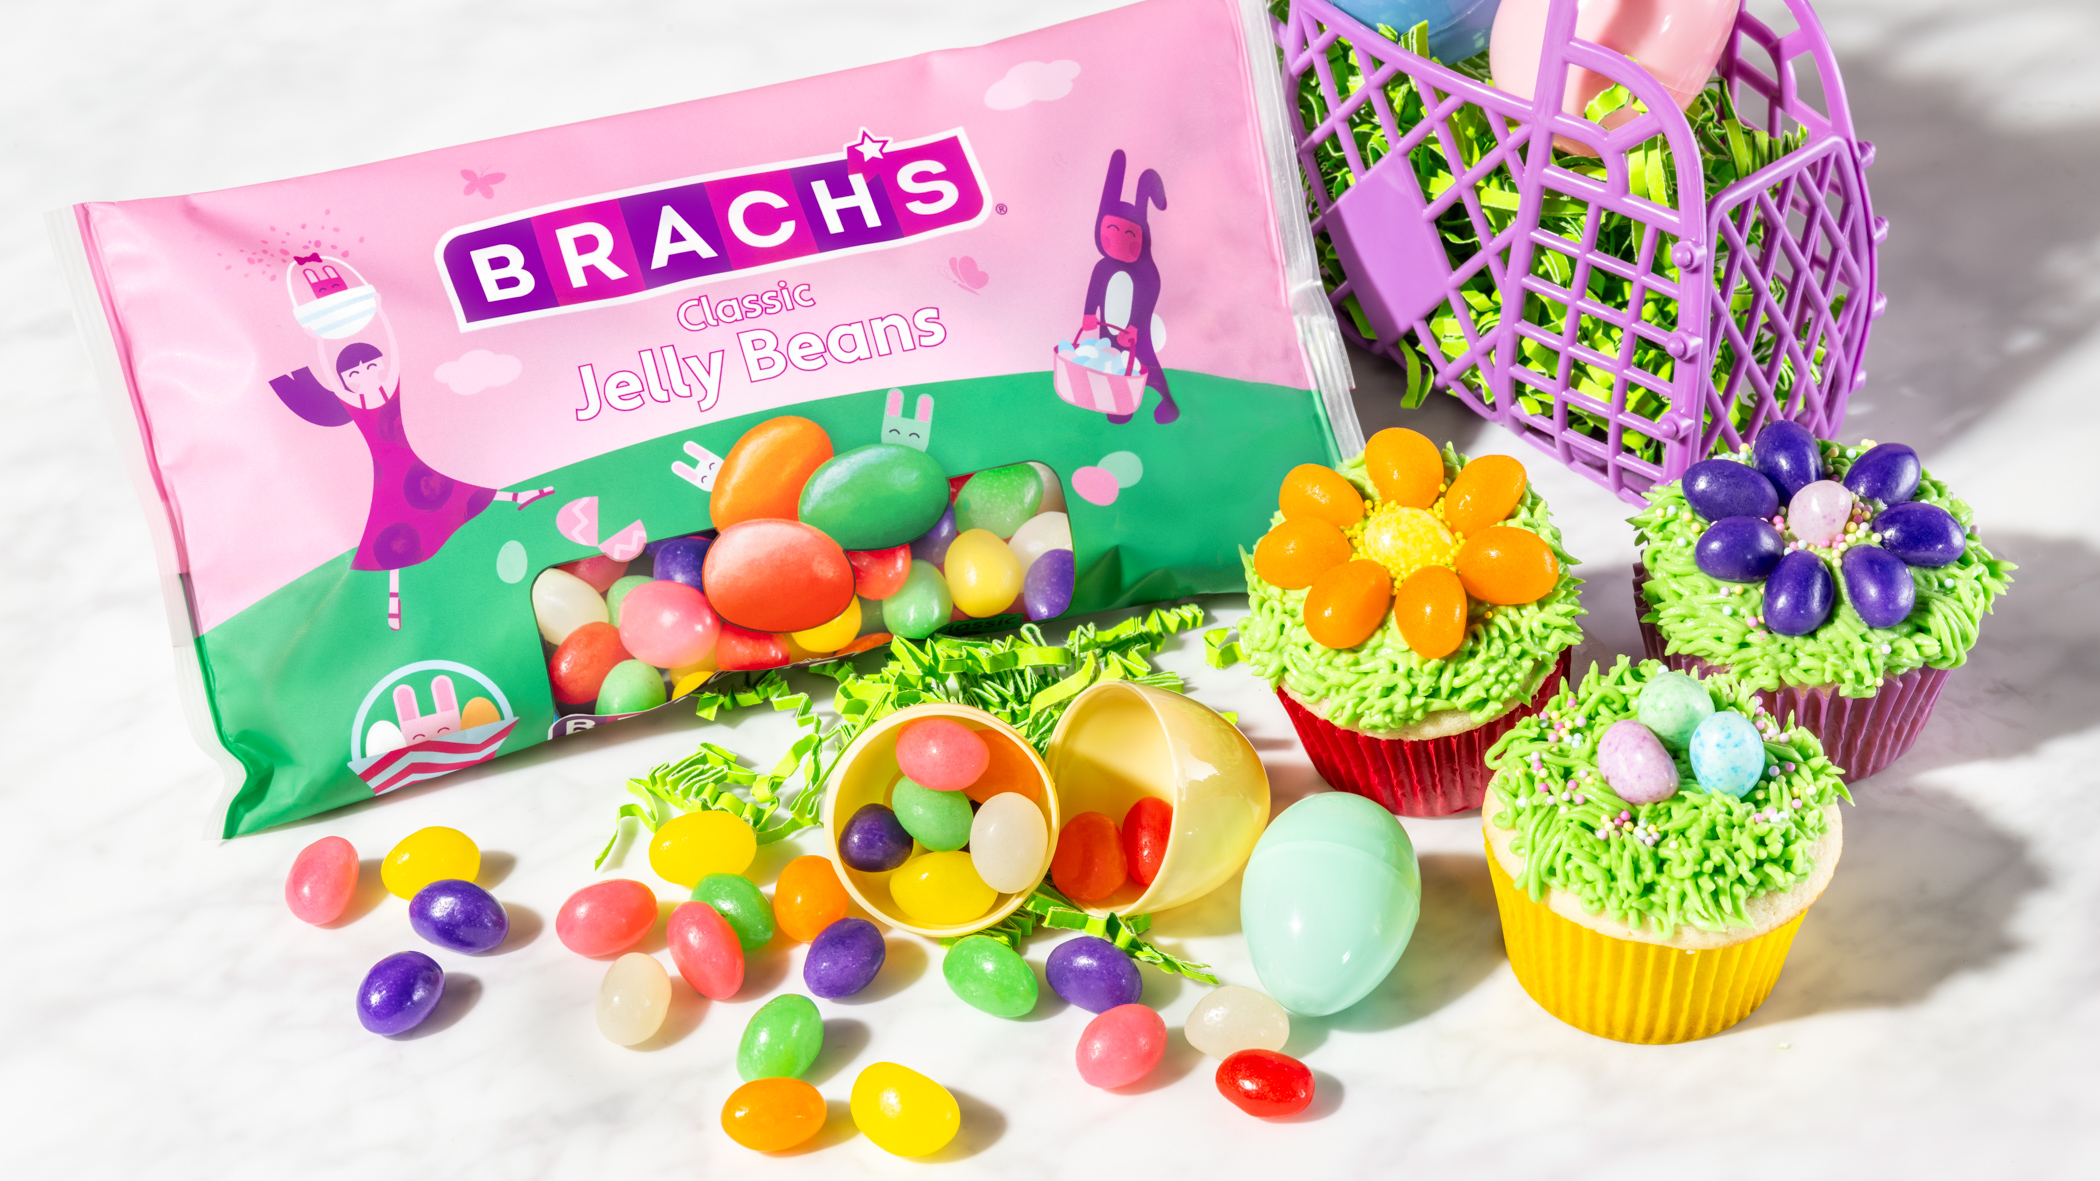 We Tasted And Ranked Brach's New Easter Brunch Jelly Beans